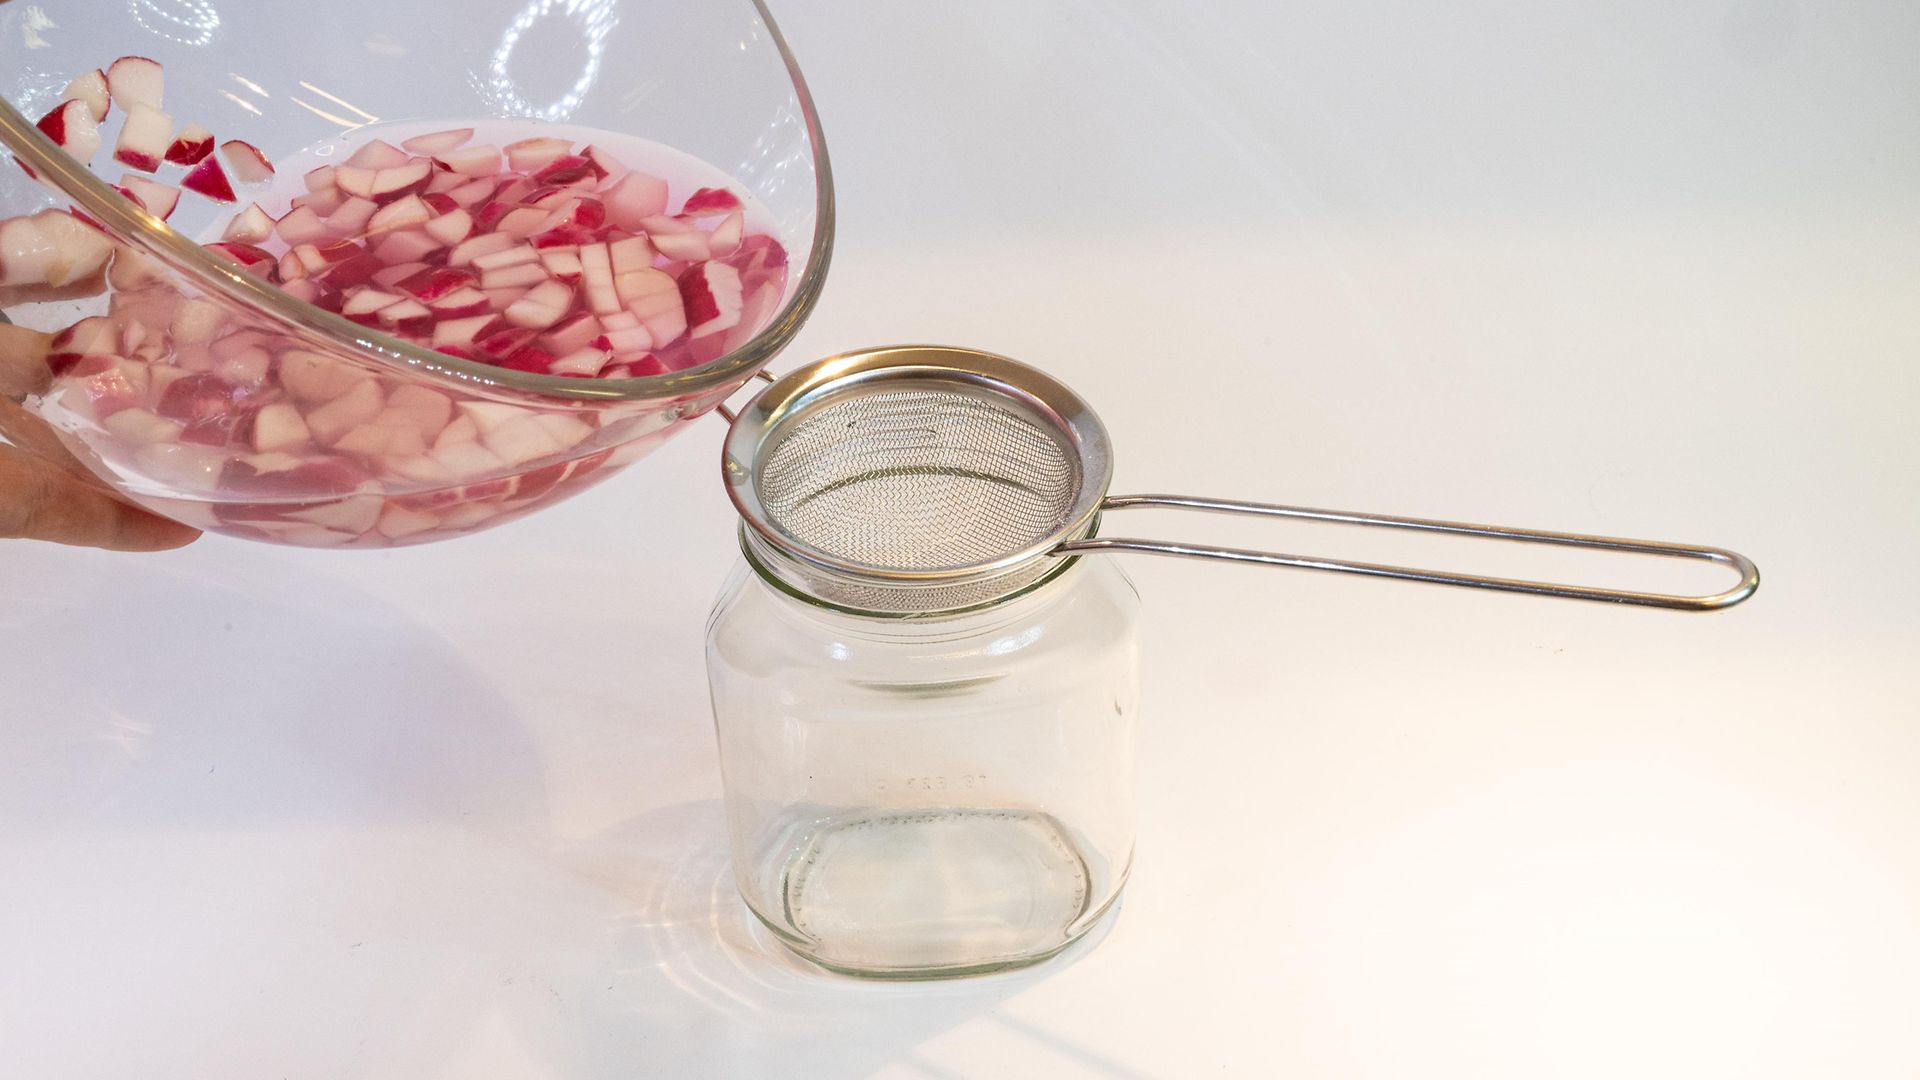 radish juice is poured through sieve into a glass